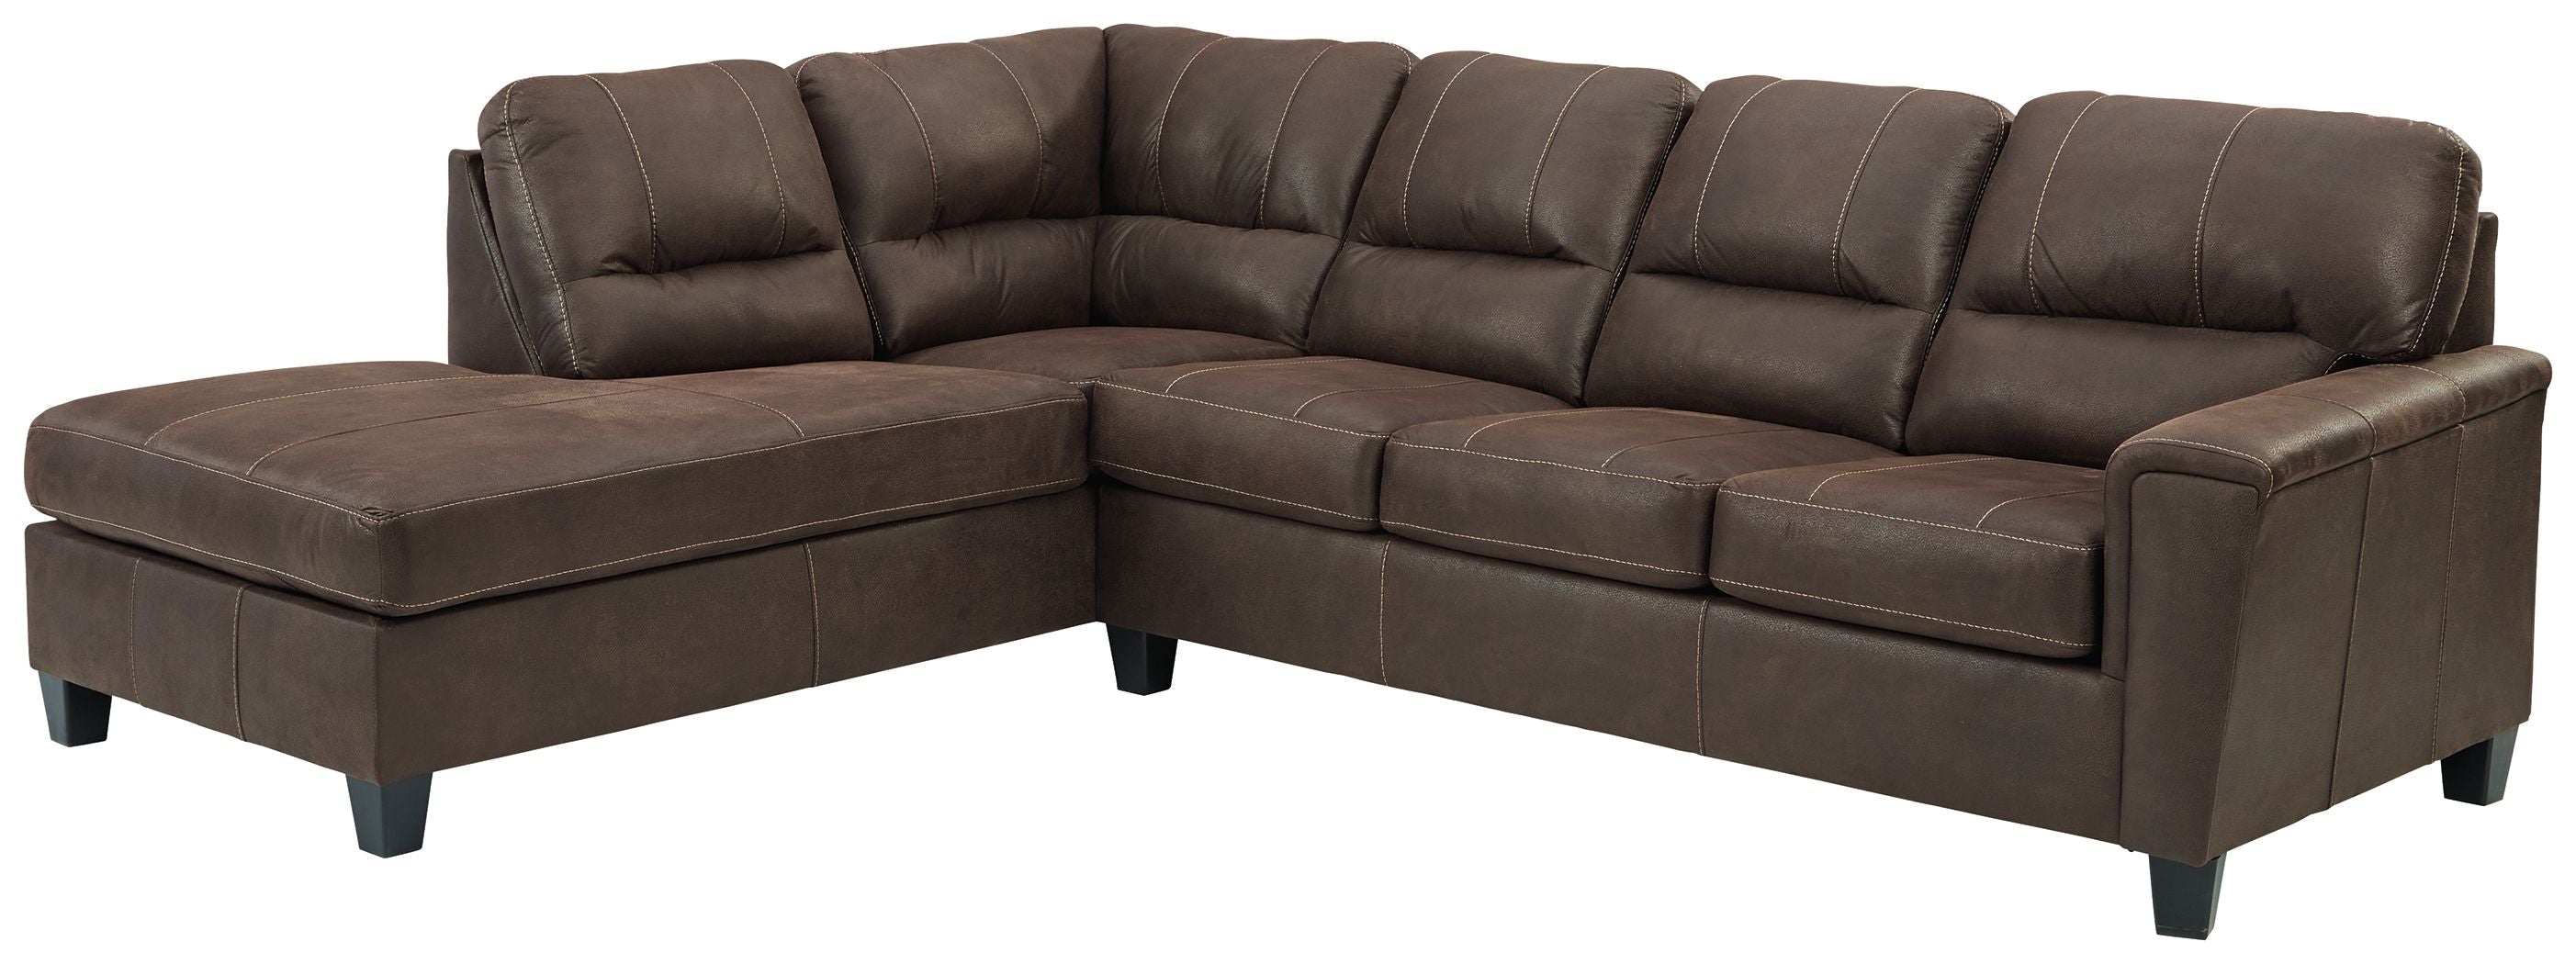 Navi Faux Leather Sleeper Sectional w/ Chaise-Sleeper Sectionals-American Furniture Outlet